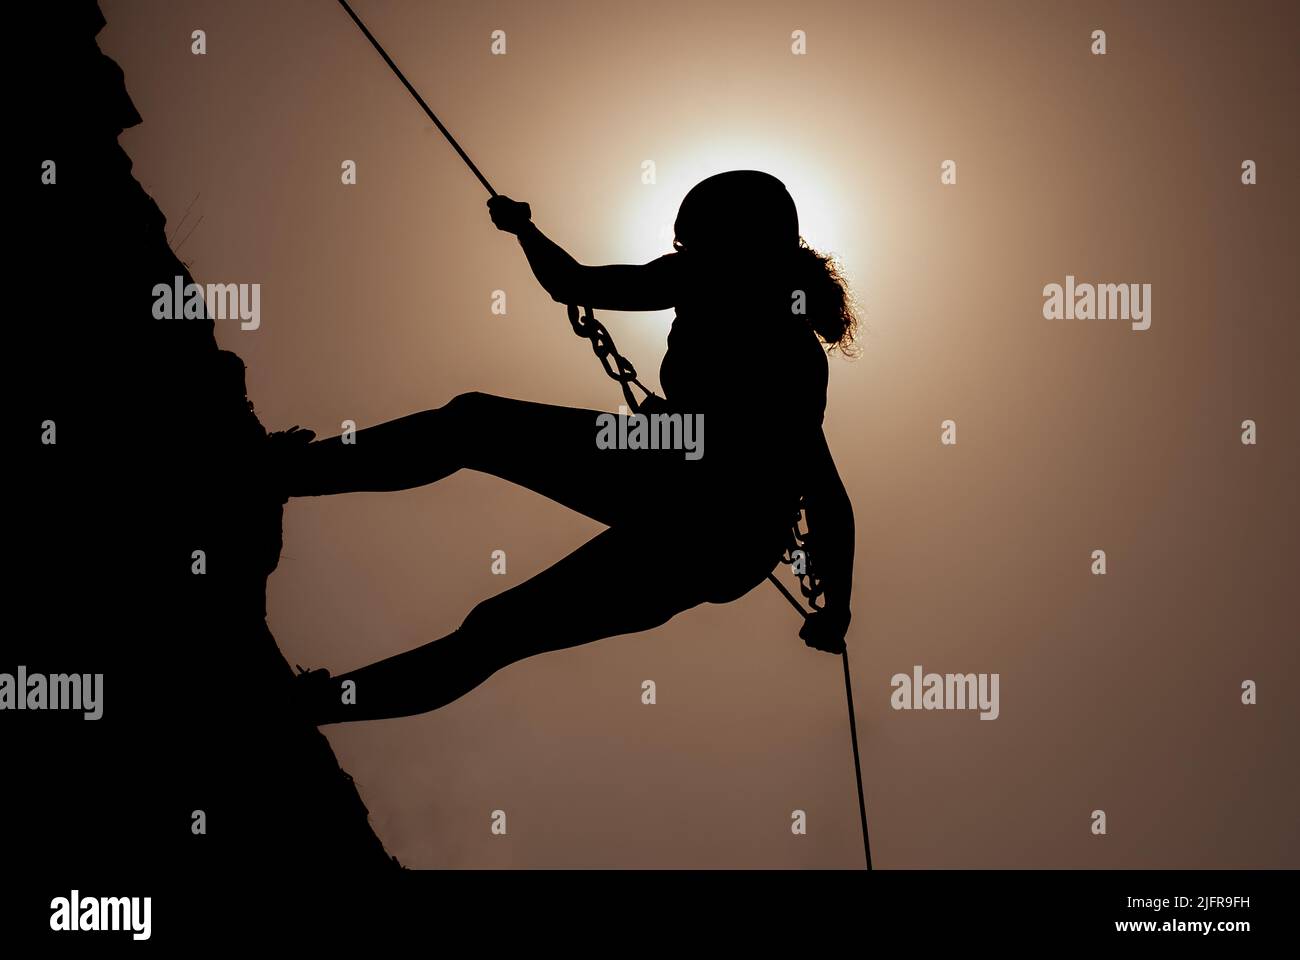 Silhouette of successful young female climber in the mountains Concept of self-improvement, motivation, movement inspiration, motivational goals. Adve Stock Photo